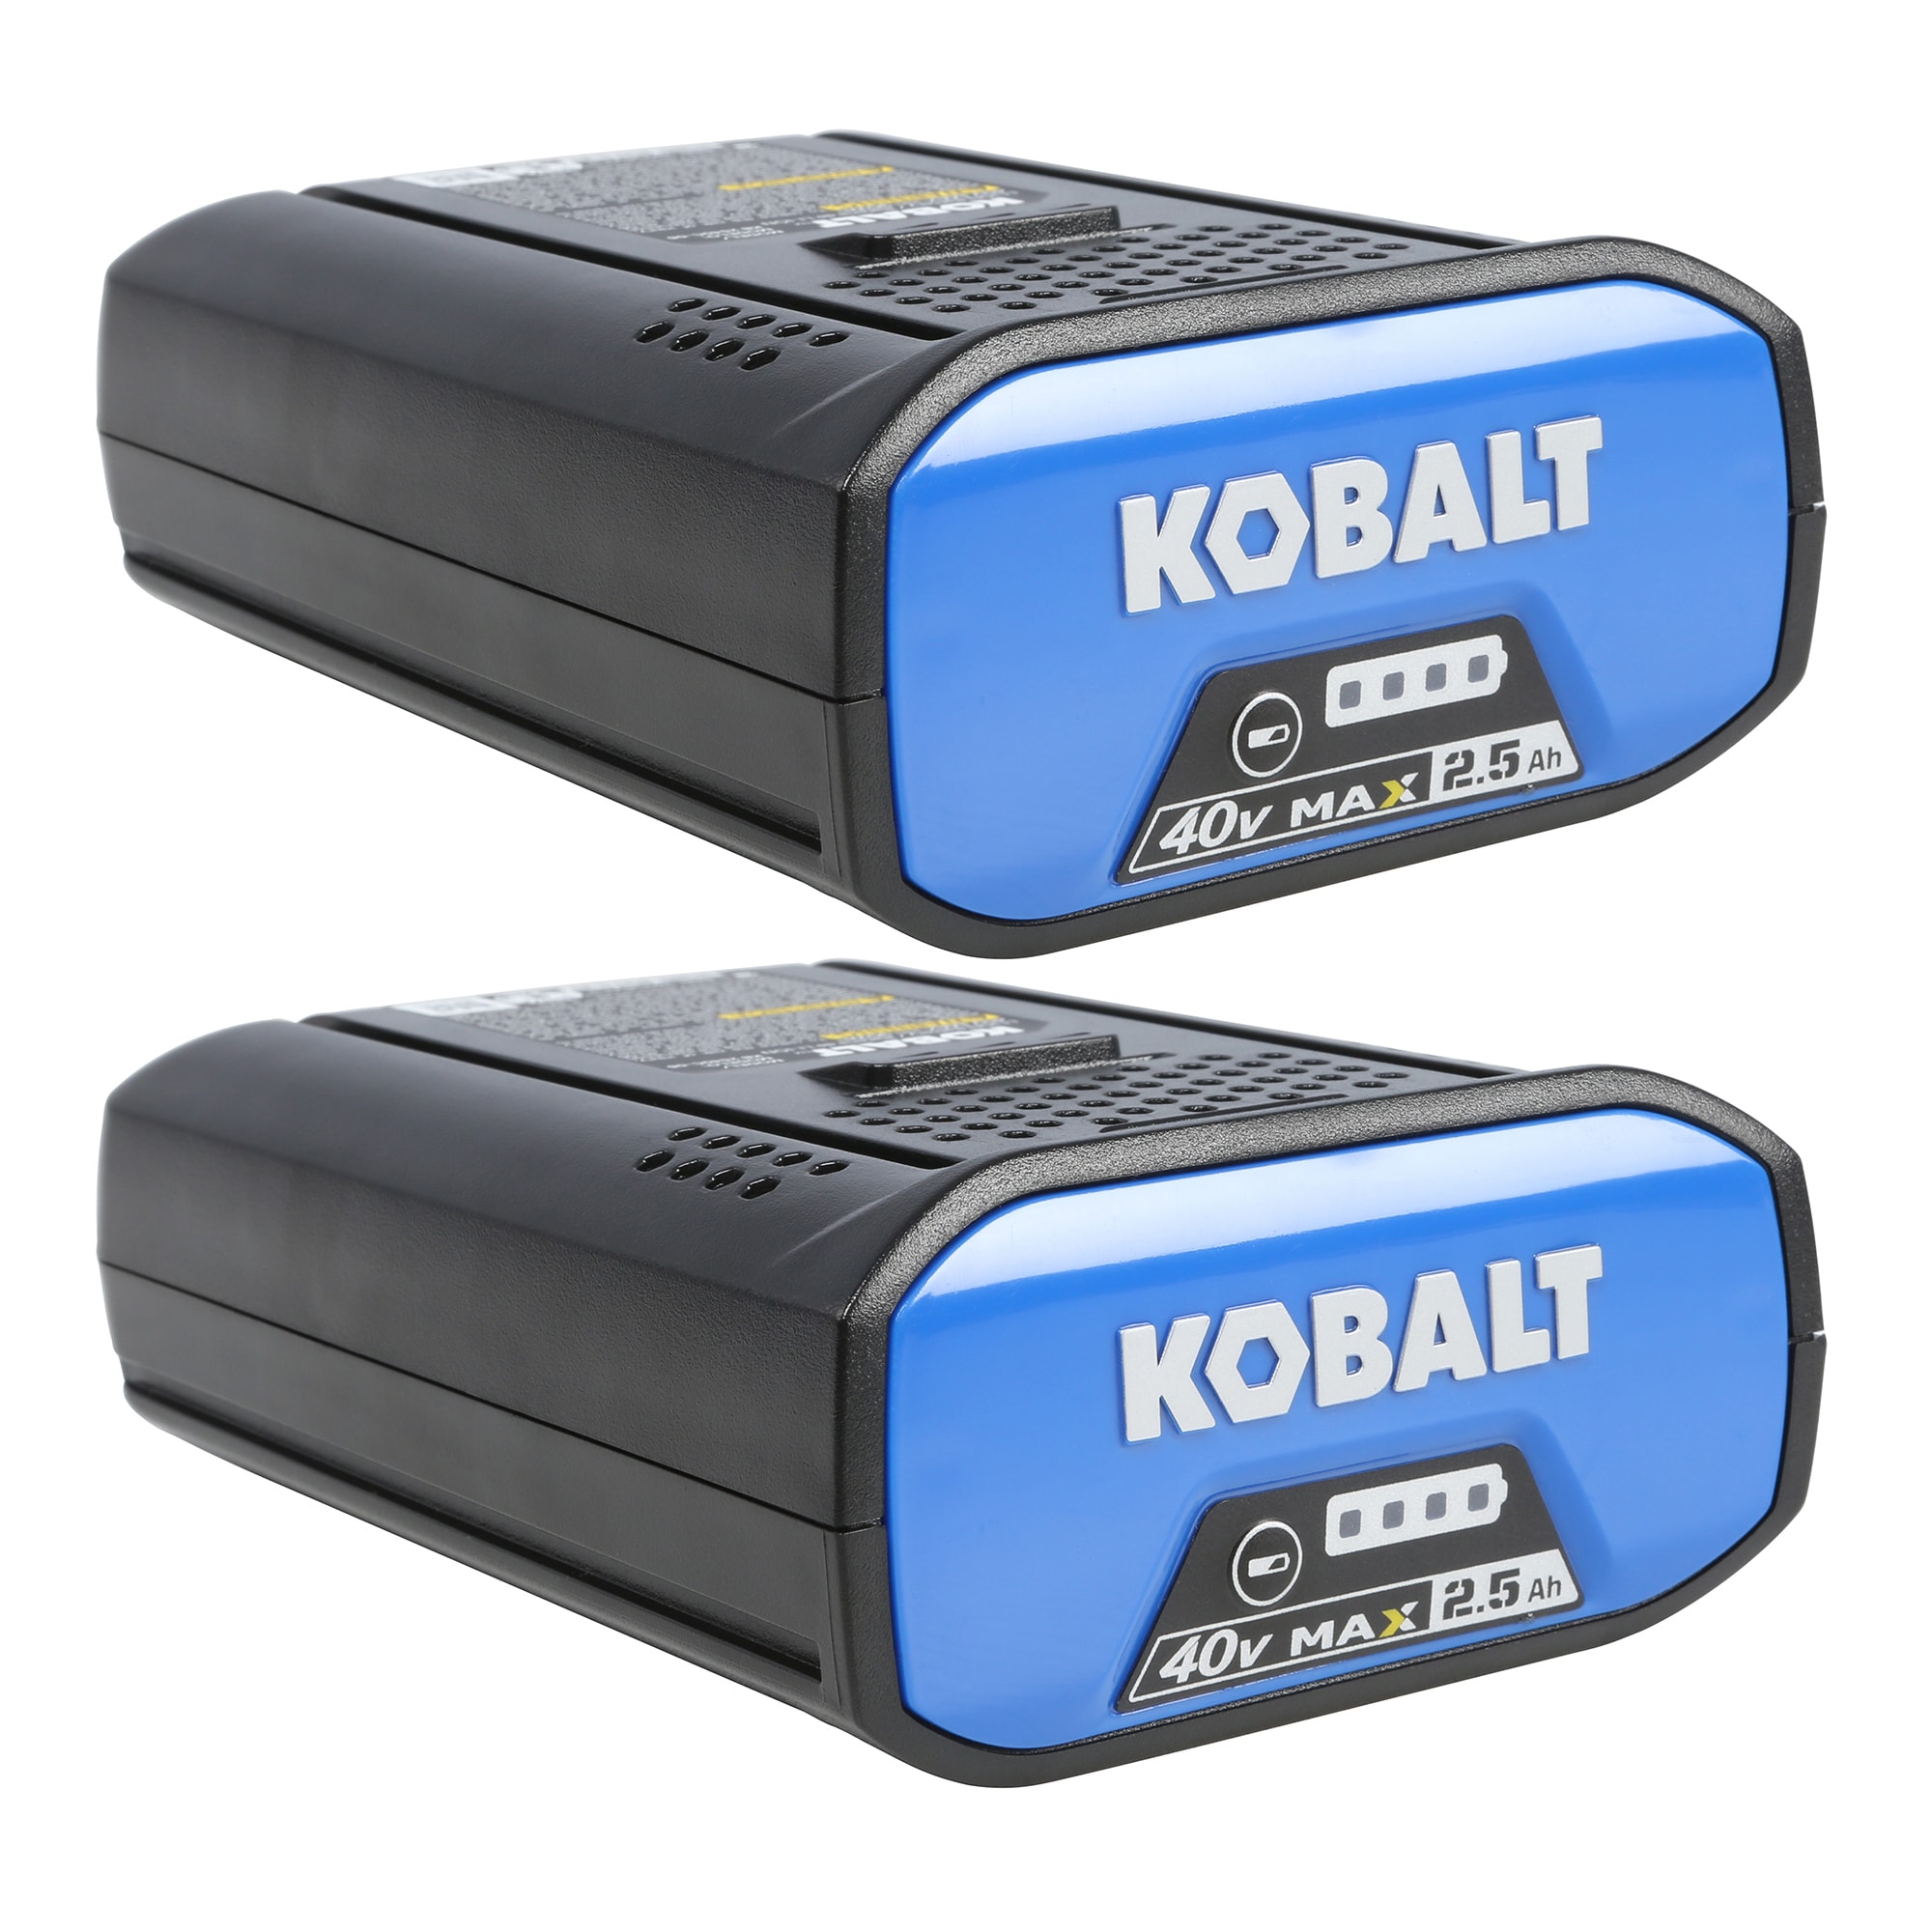 Kobalt 40-Volt Max 3 Ah Rechargeable Lithium Ion (Li-Ion) Cordless Power  Equipment Battery in the Cordless Power Equipment Batteries & Chargers  department at